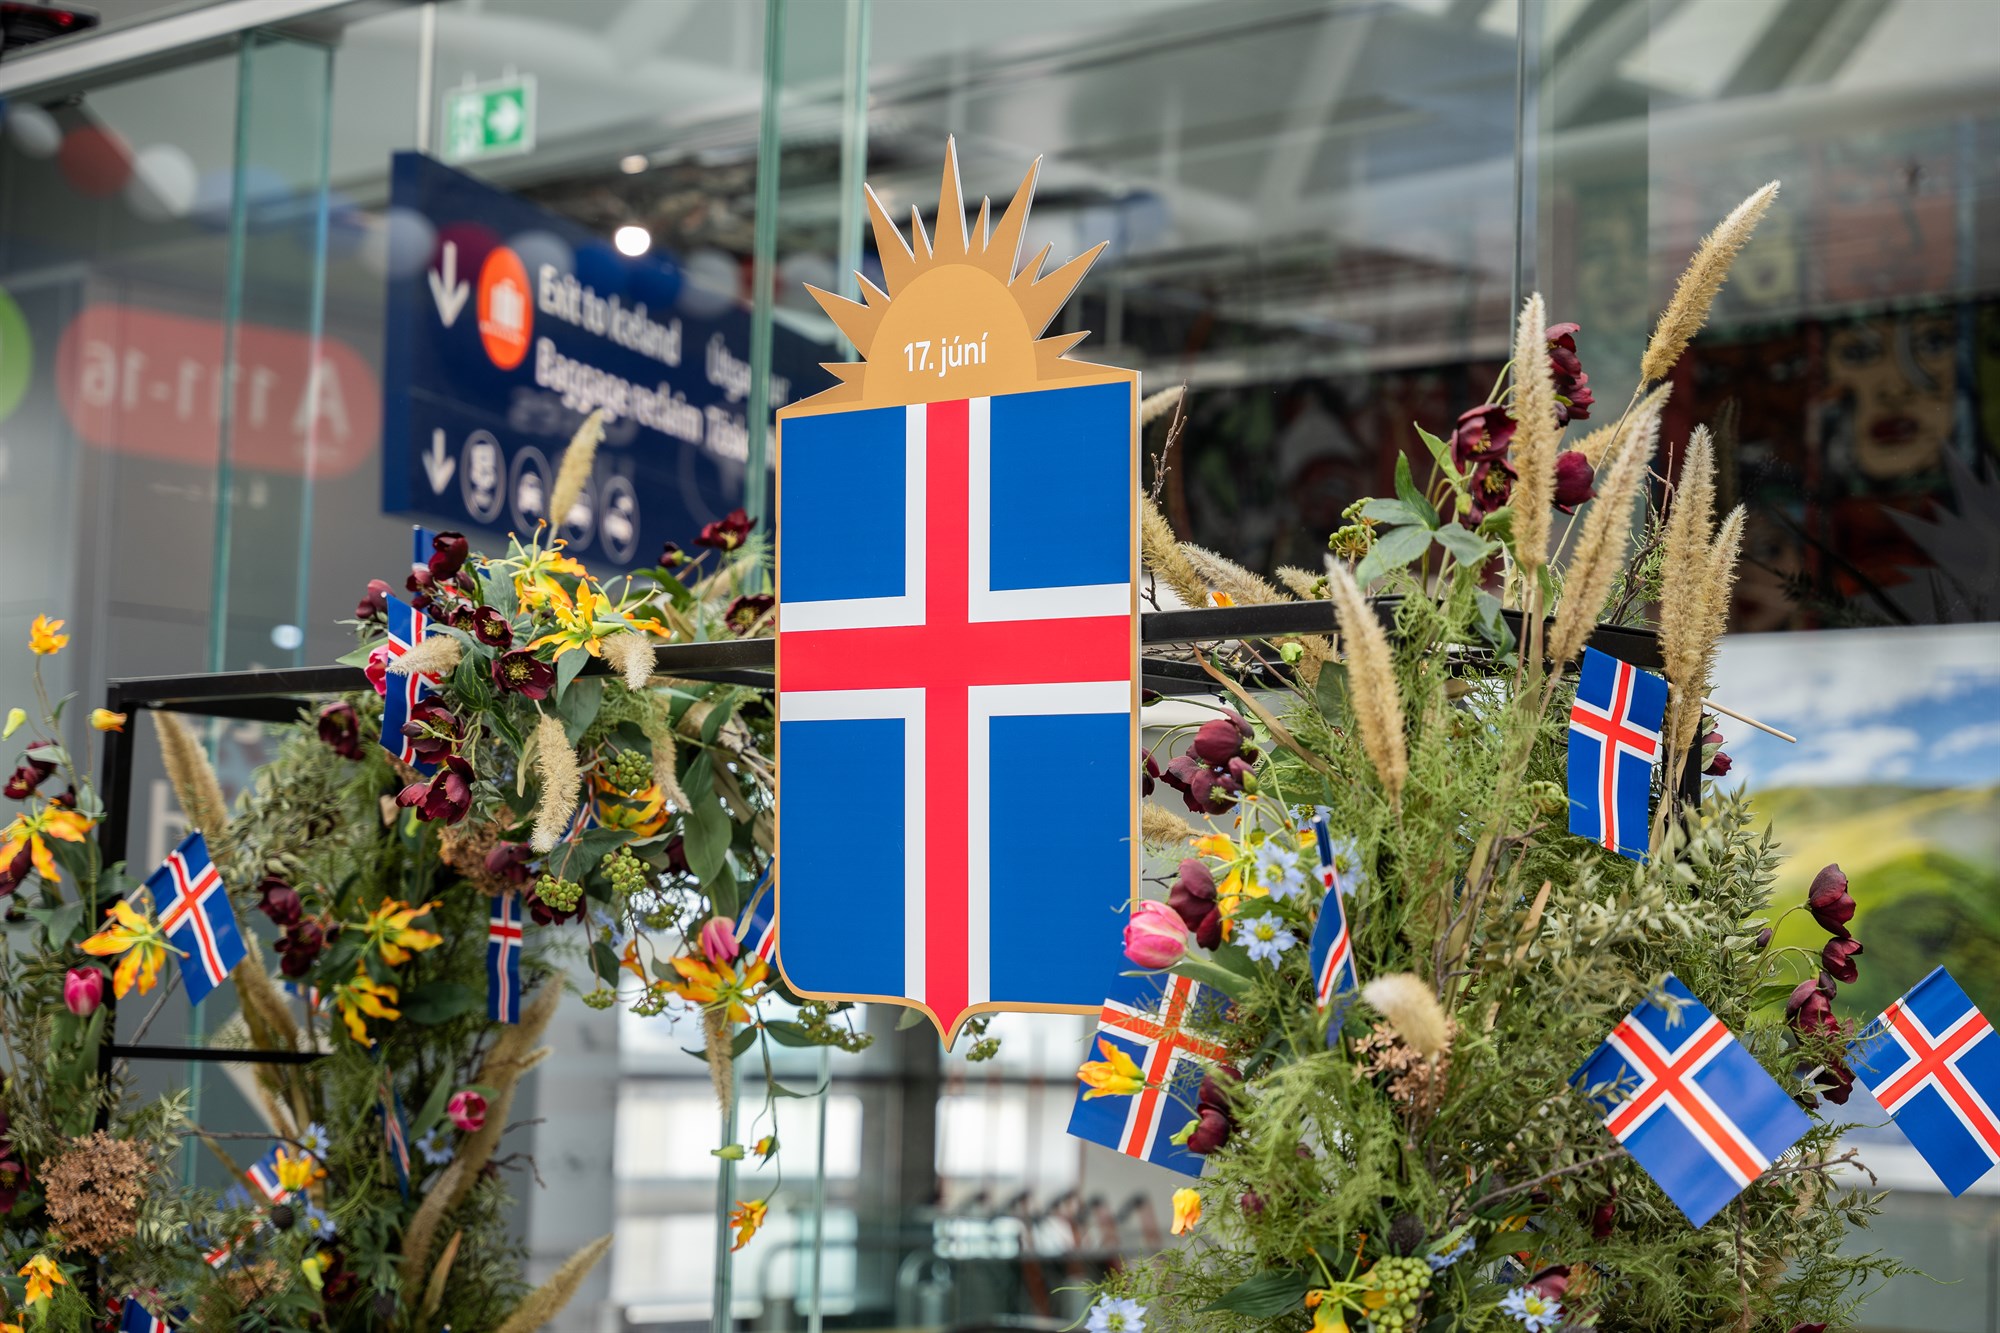 Happy Iceland's National Day